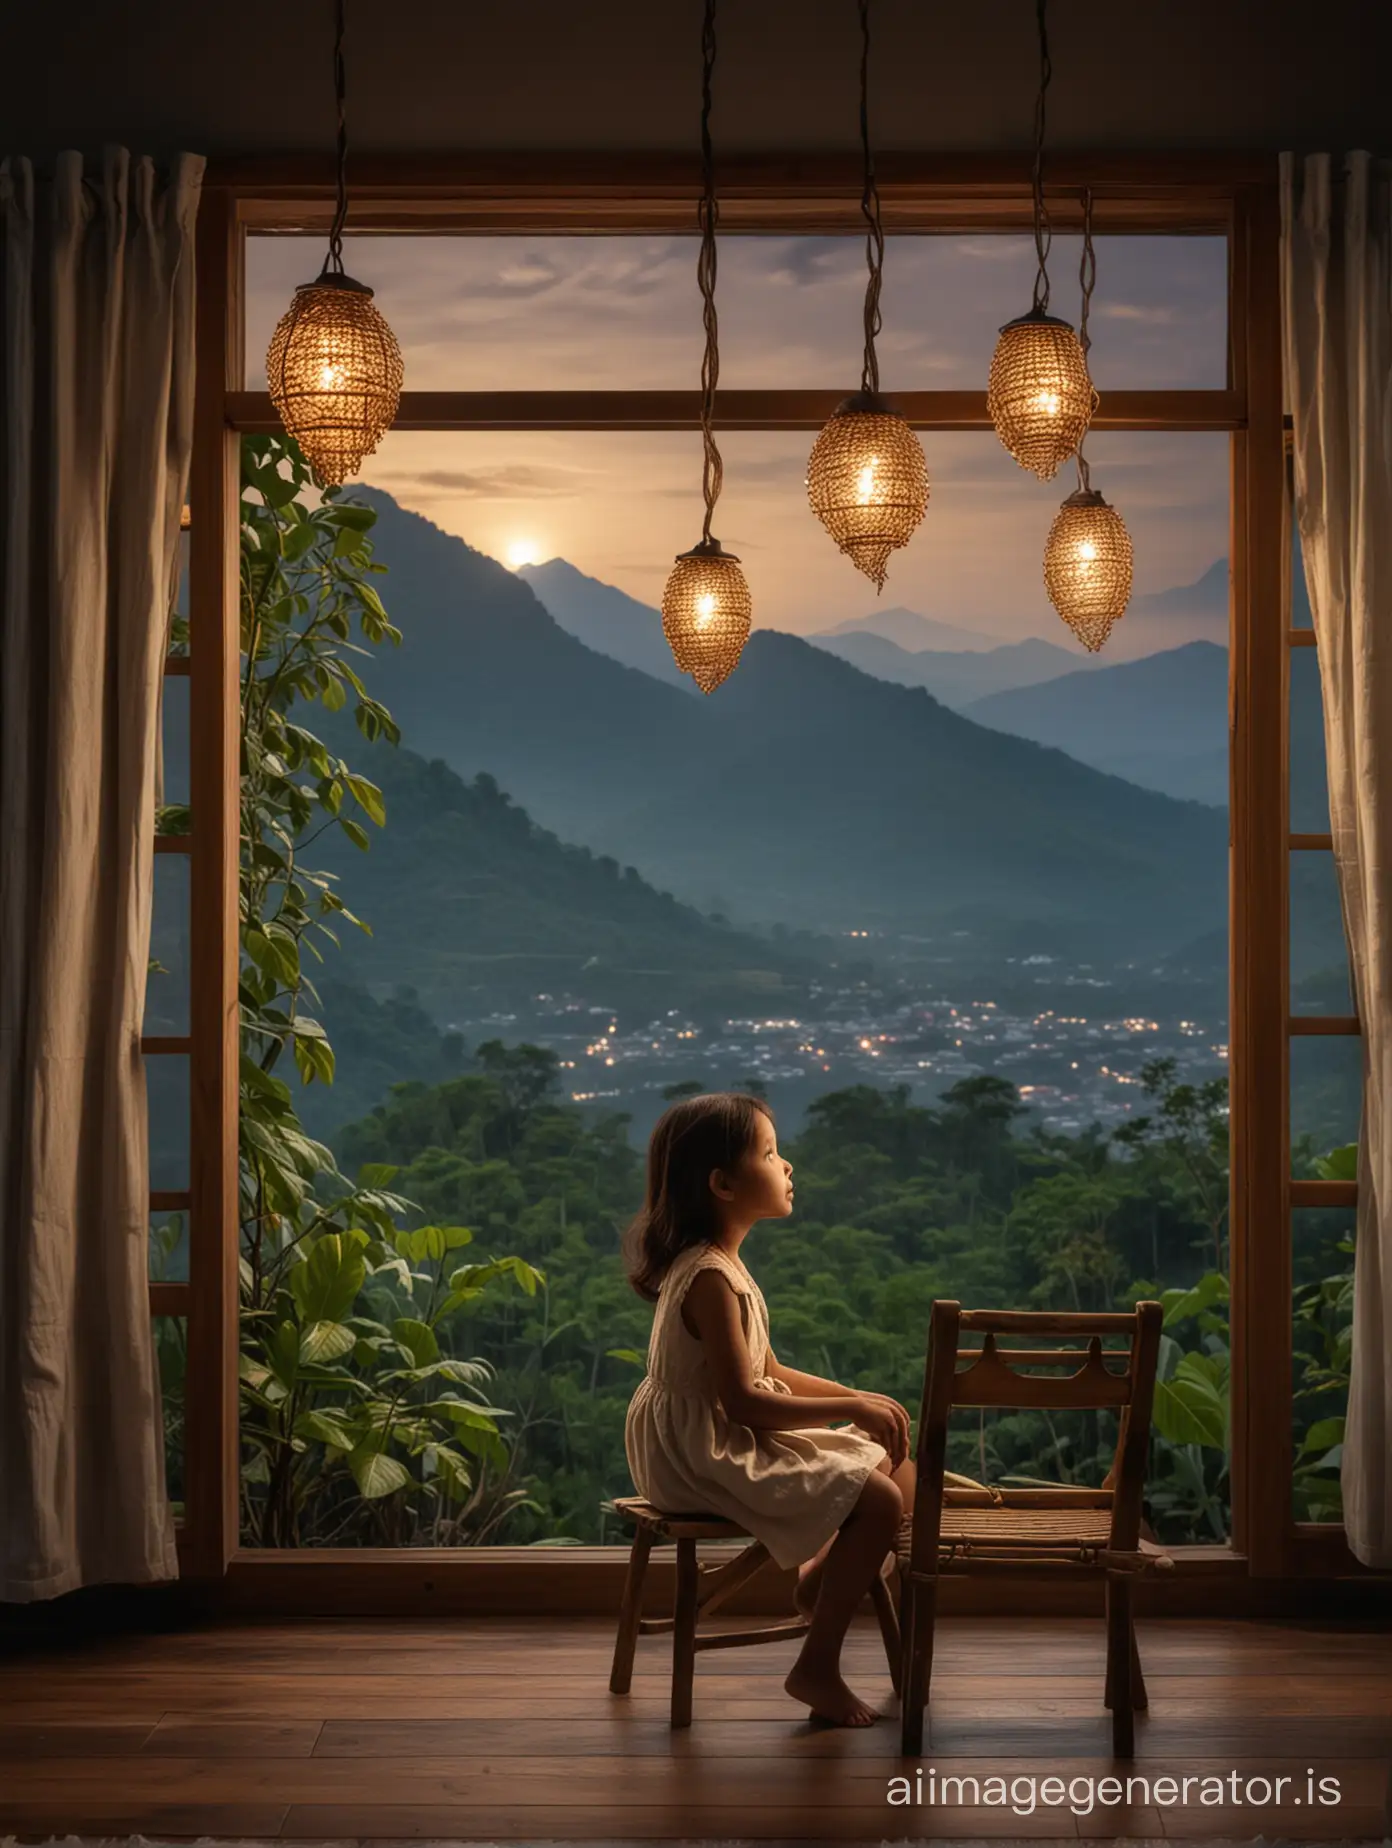 A six year old Indonesian girl sit on the Wood and chair wood. She pondered and looked at the window in the night. Add the hanging lamp. Add leaves on the table. Background mountains.